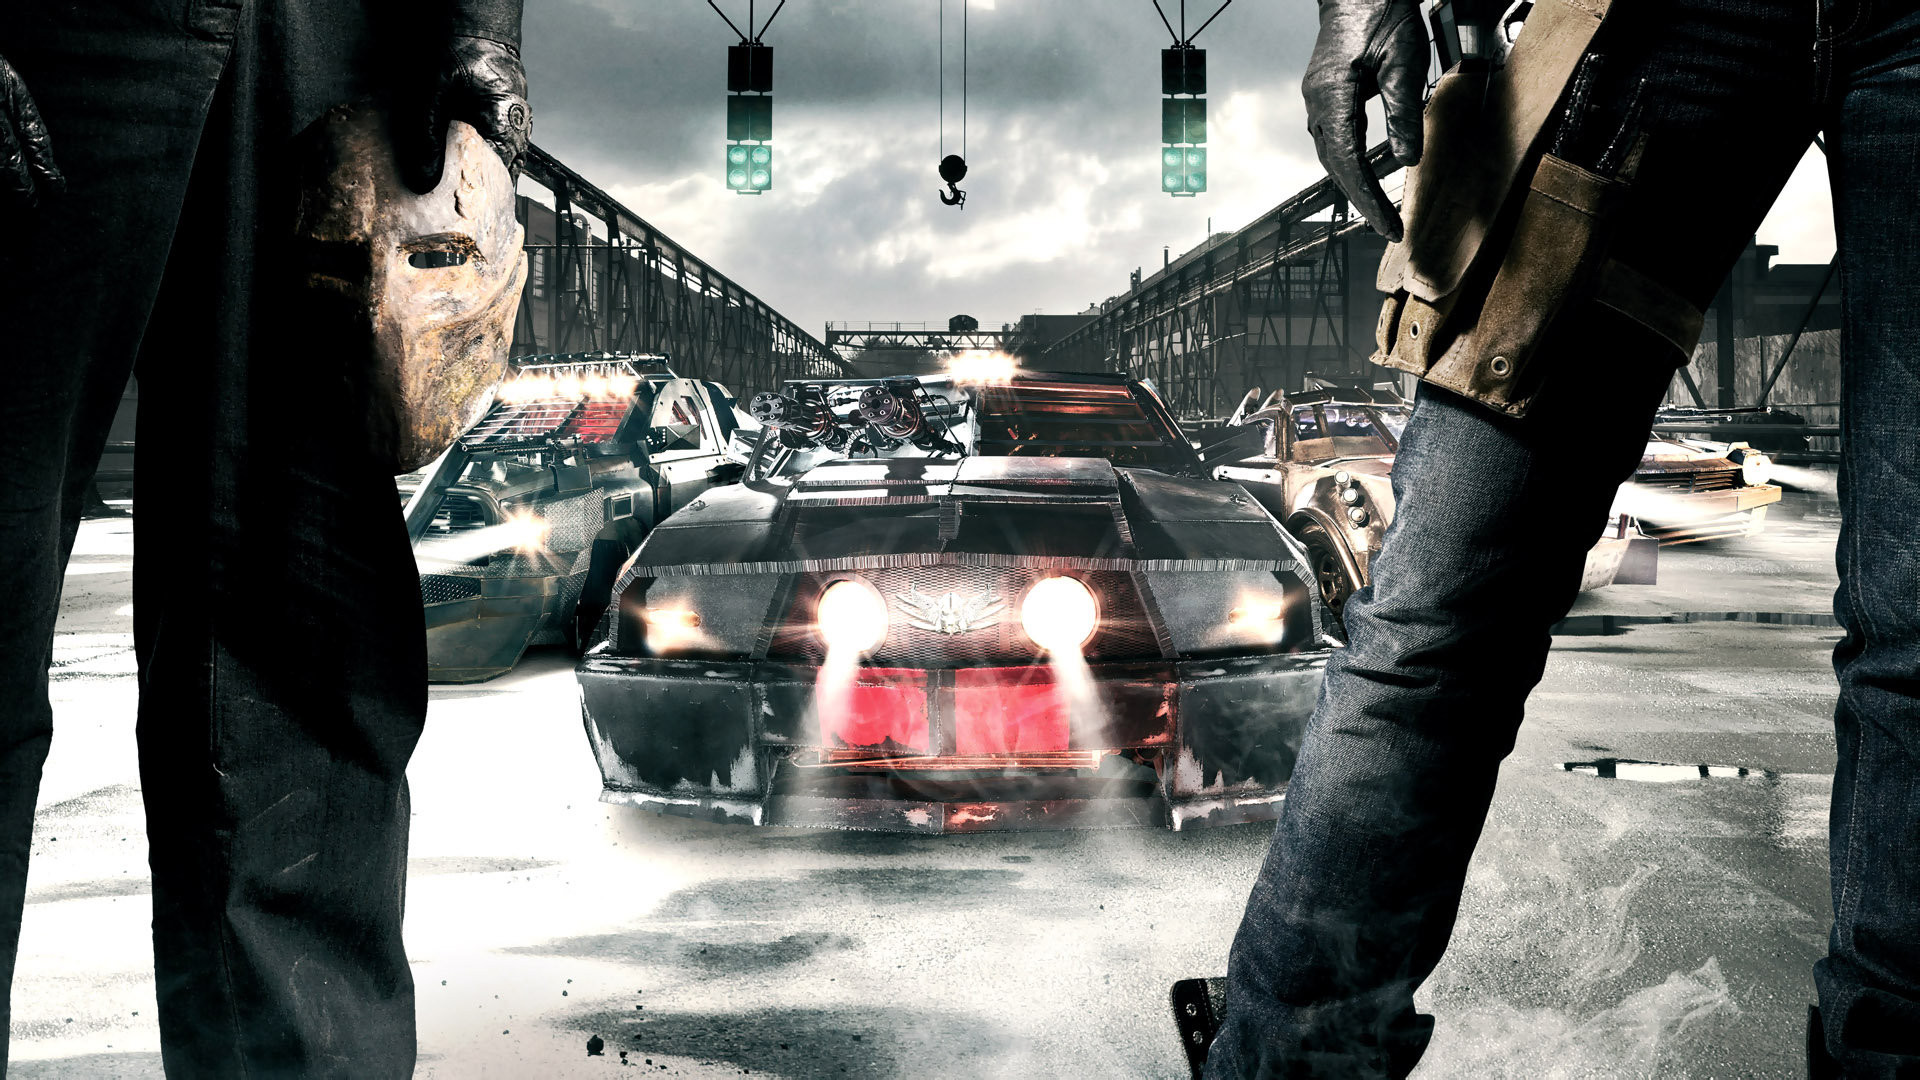 death race wallpaper,mode of transport,shooter game,pc game,vehicle,games